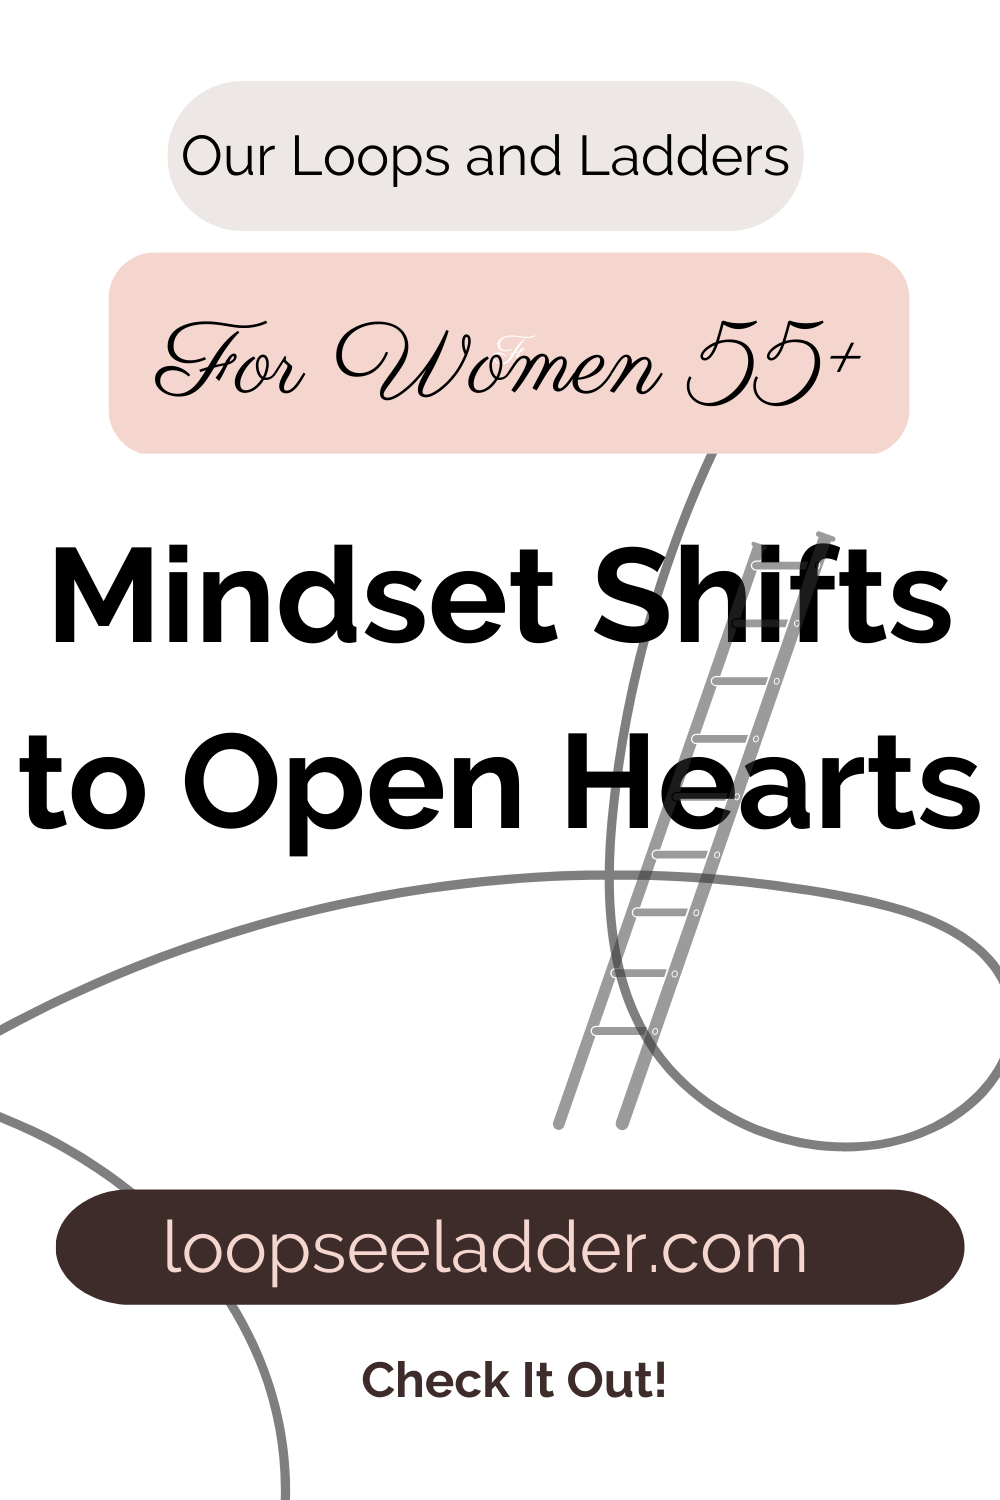 Mindset Shifts to Open Hearts